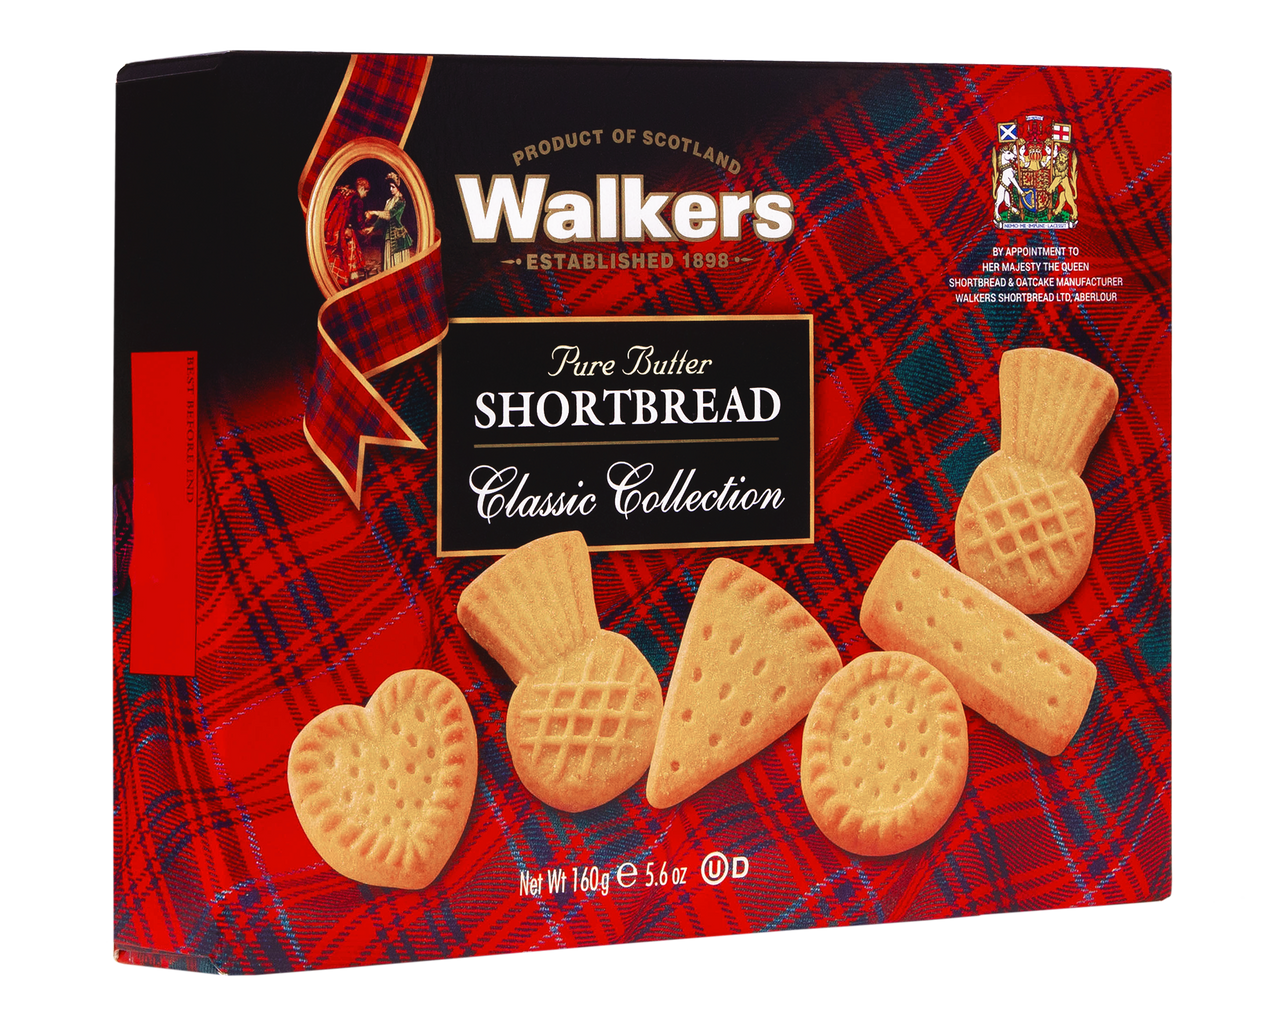 Walker's Classic Shortbread Collection with fourteen cookies in different shapes